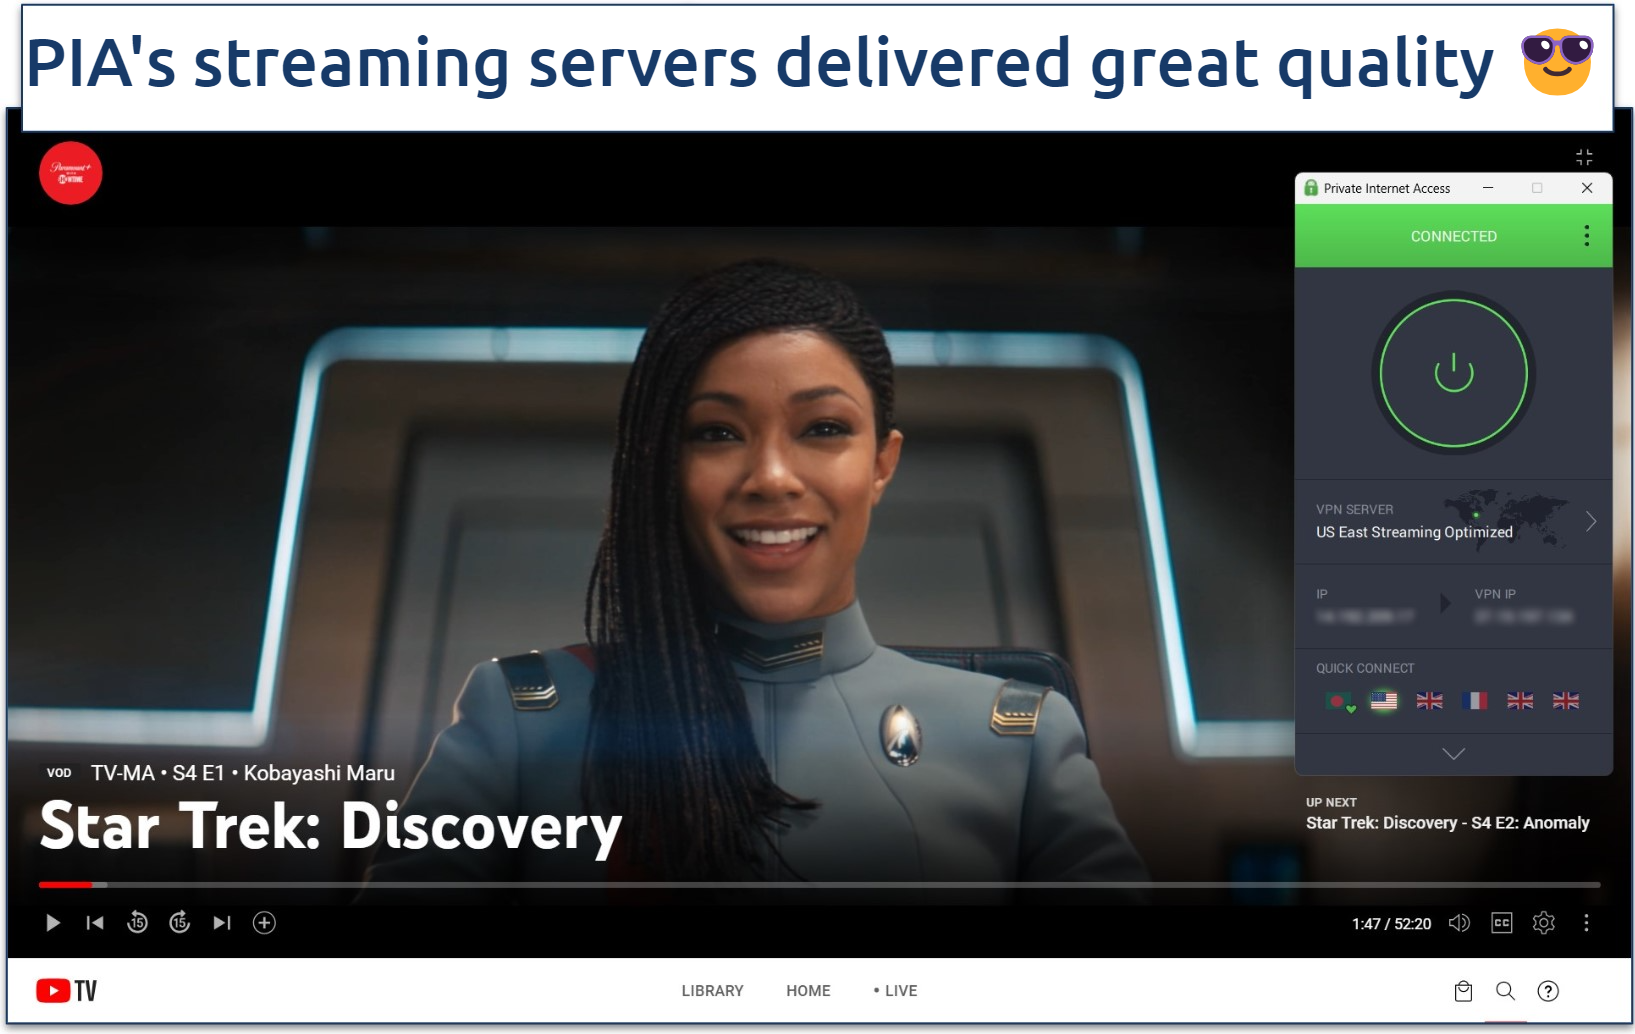 A screenshot of streaming Star Trek Discovery on the Paramount+ channel on YouTube TV while connected to PIA's US East Streaming Optimized server.